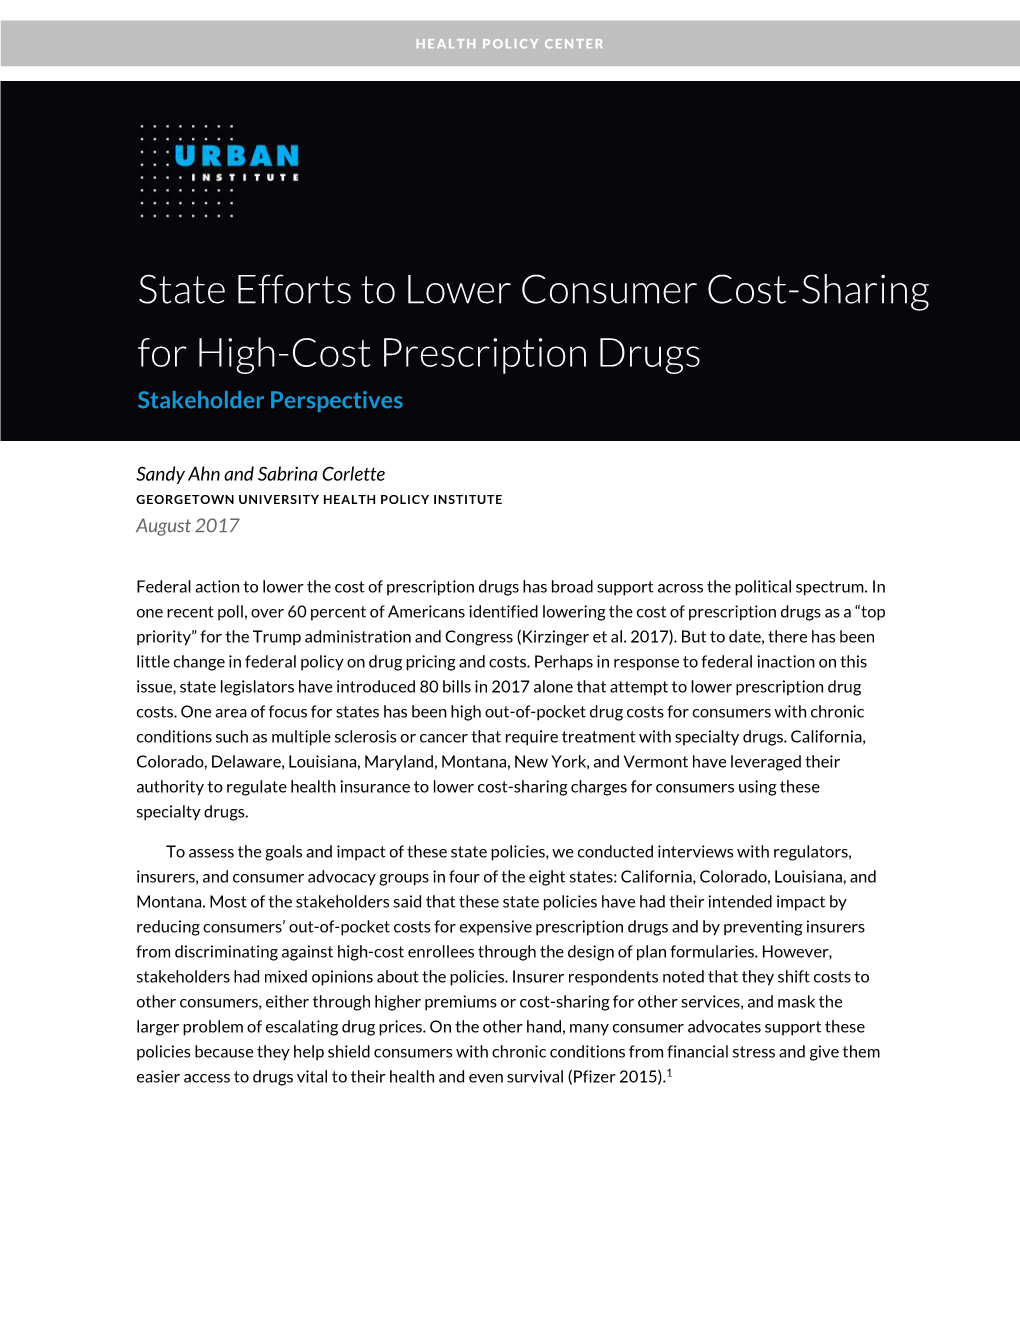 State Efforts to Lower Consumer Cost-Sharing for High-Cost Prescription Drugs Stakeholder Perspectives